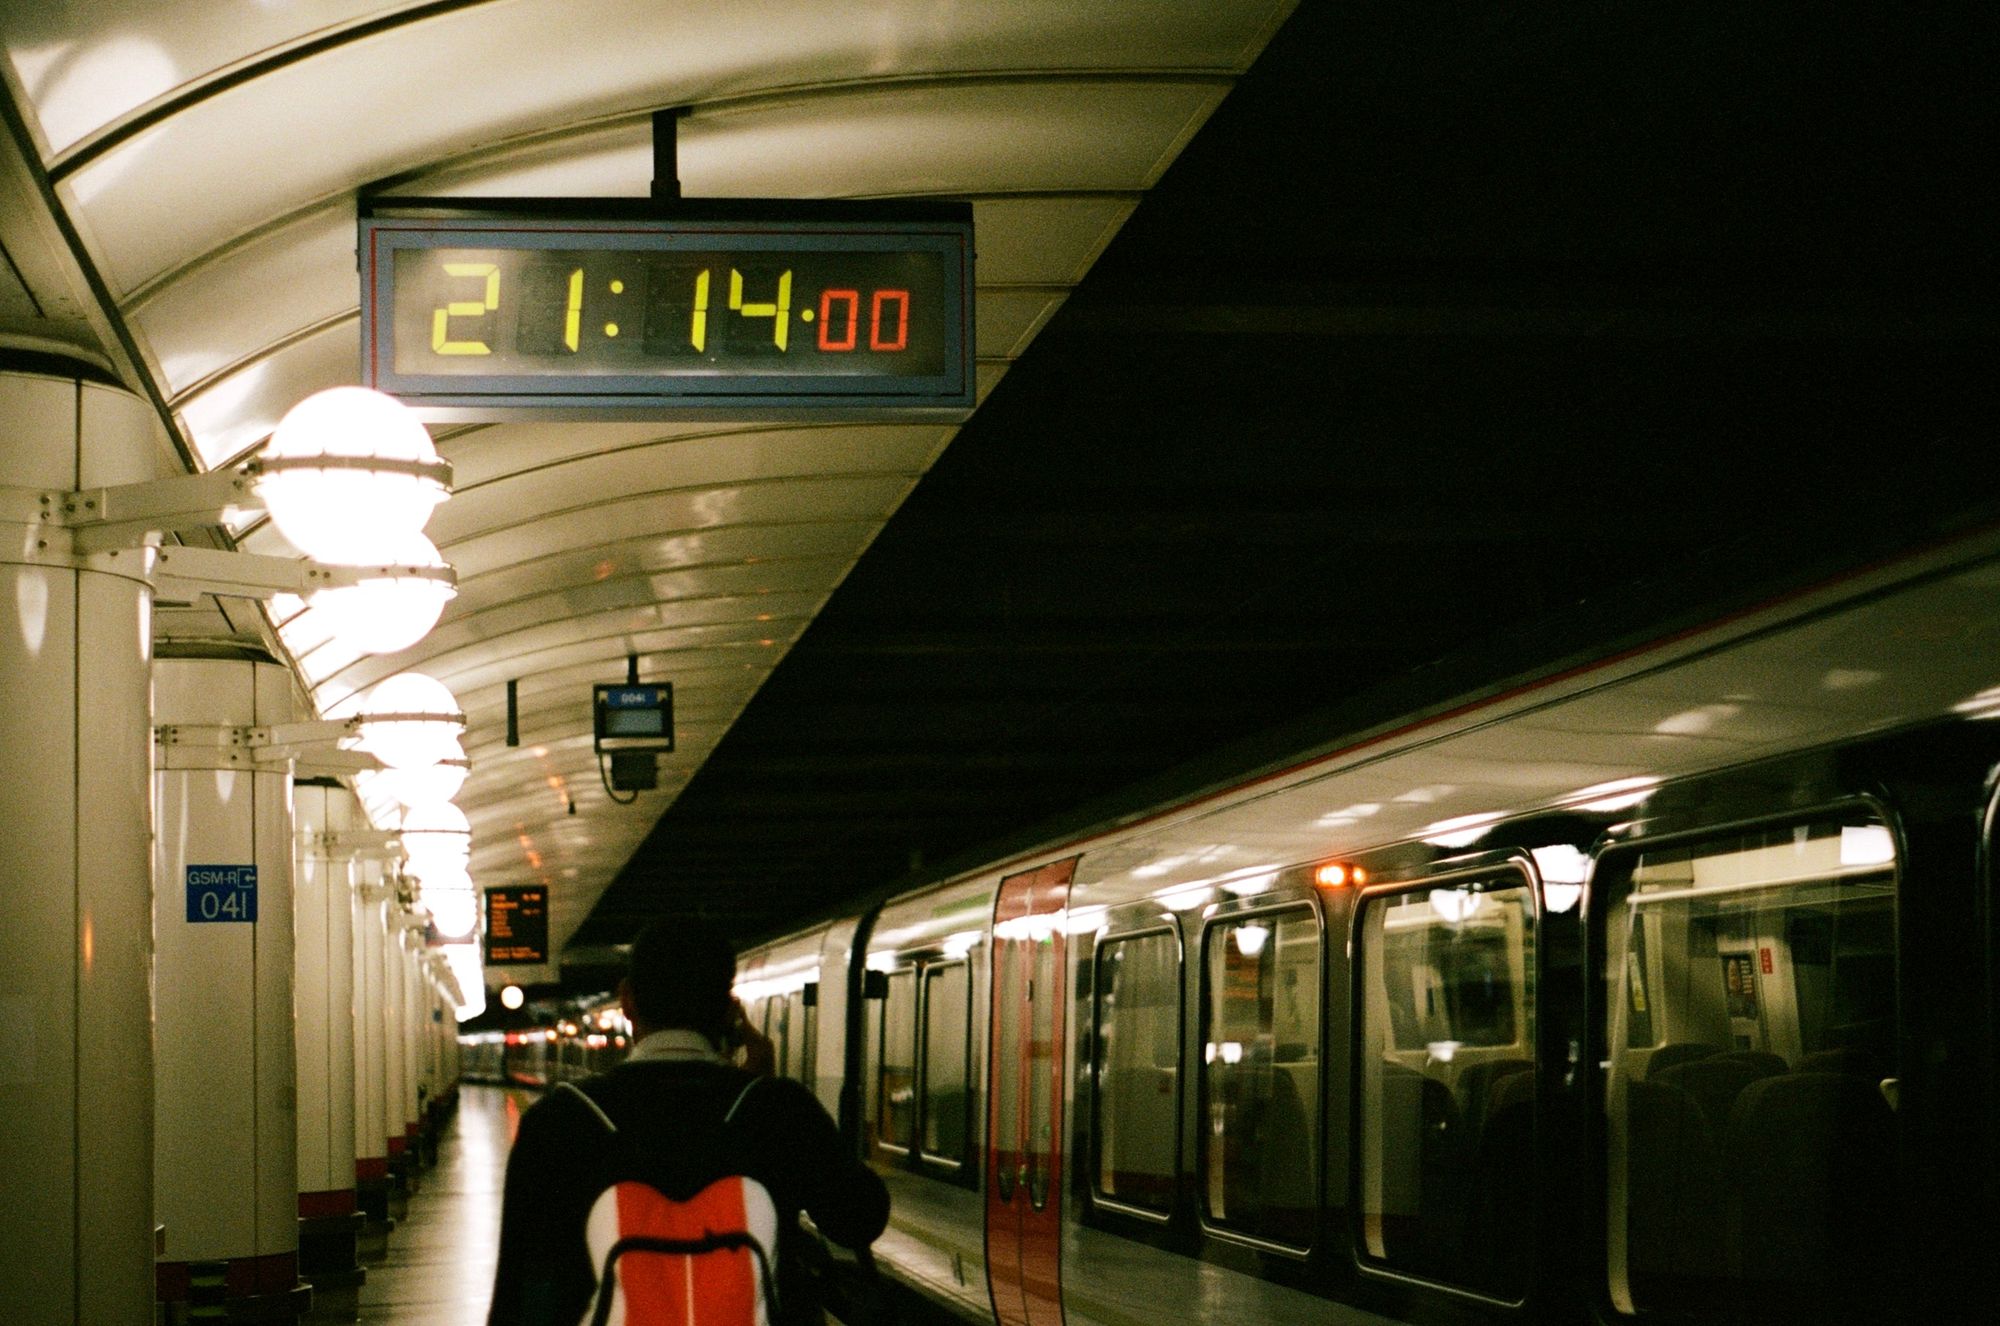 A man walks past a train with its doors unlocked but not open on a station platform lit by globe lights. The mechanical seven-segment clock reads 21:14:00.